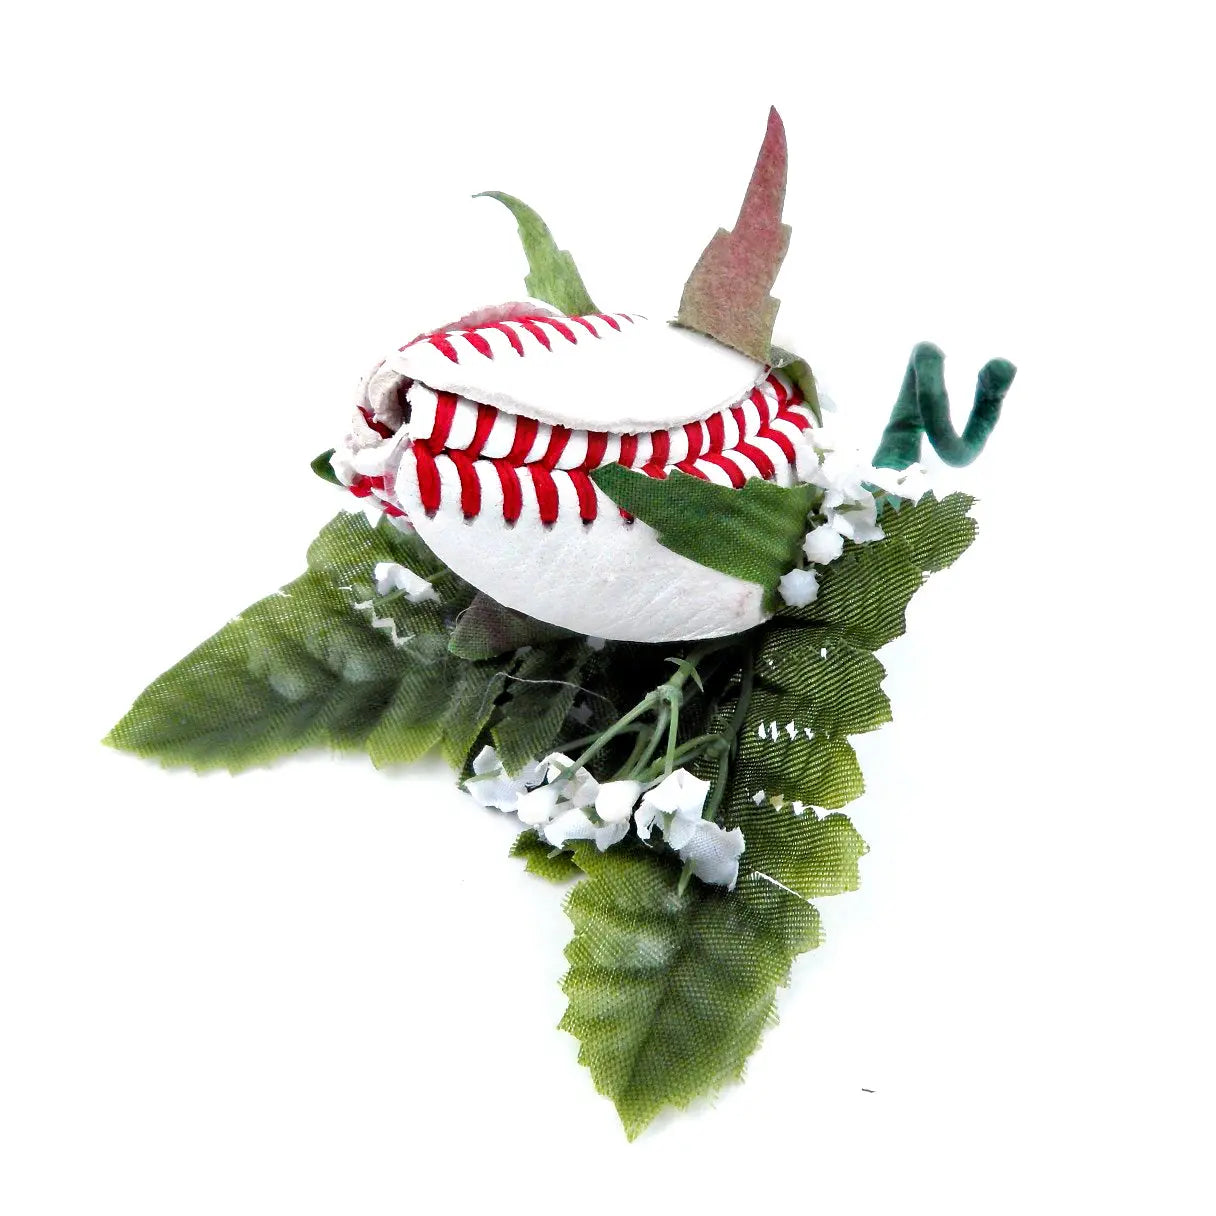 Baseball Rose Boutonniere with Gift Box Arrangement Sports Roses  